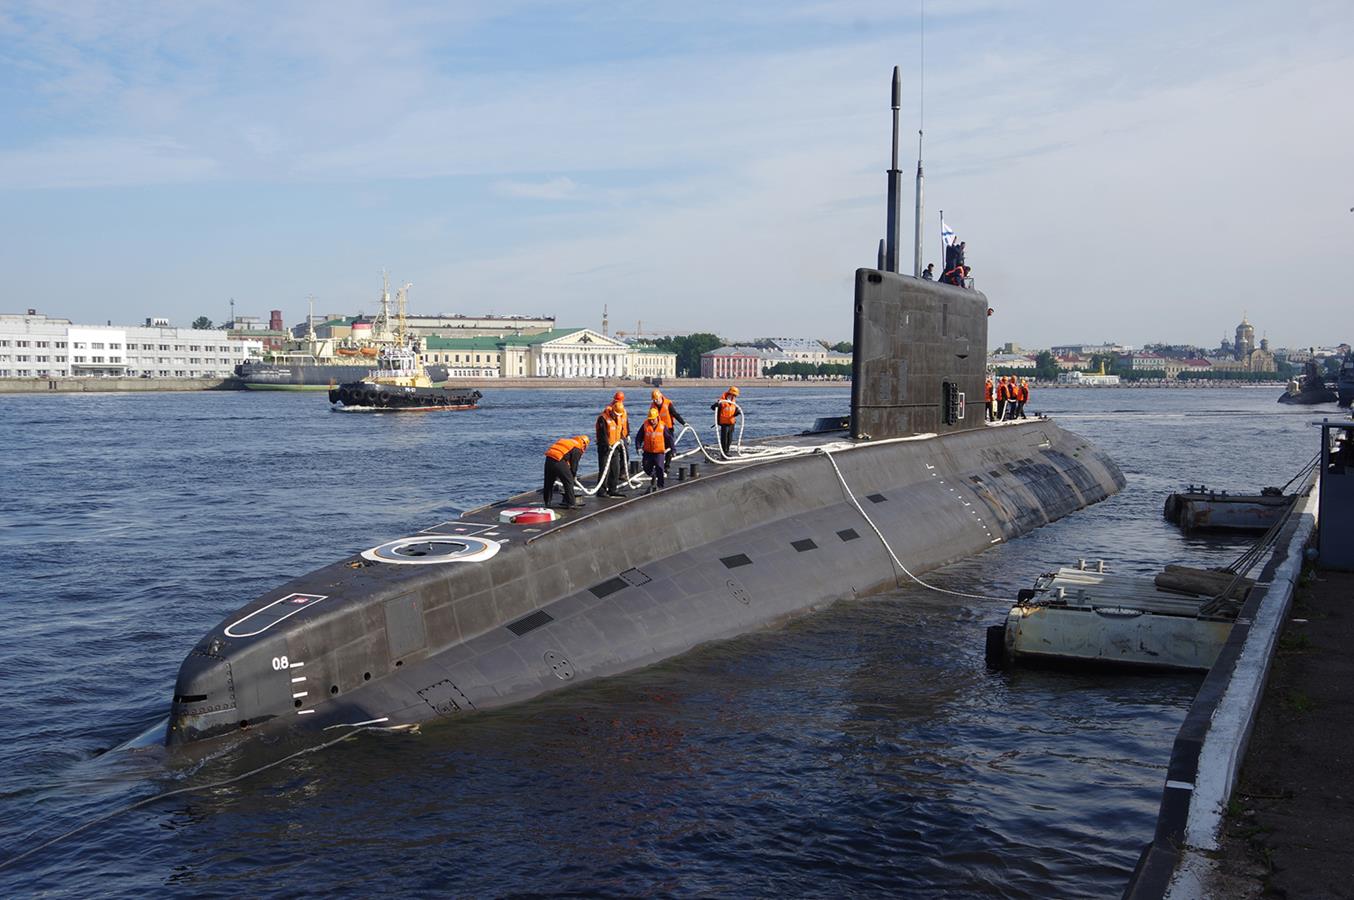 The Project 636.3 submarines will play an important role in the Russian Pacific fleet